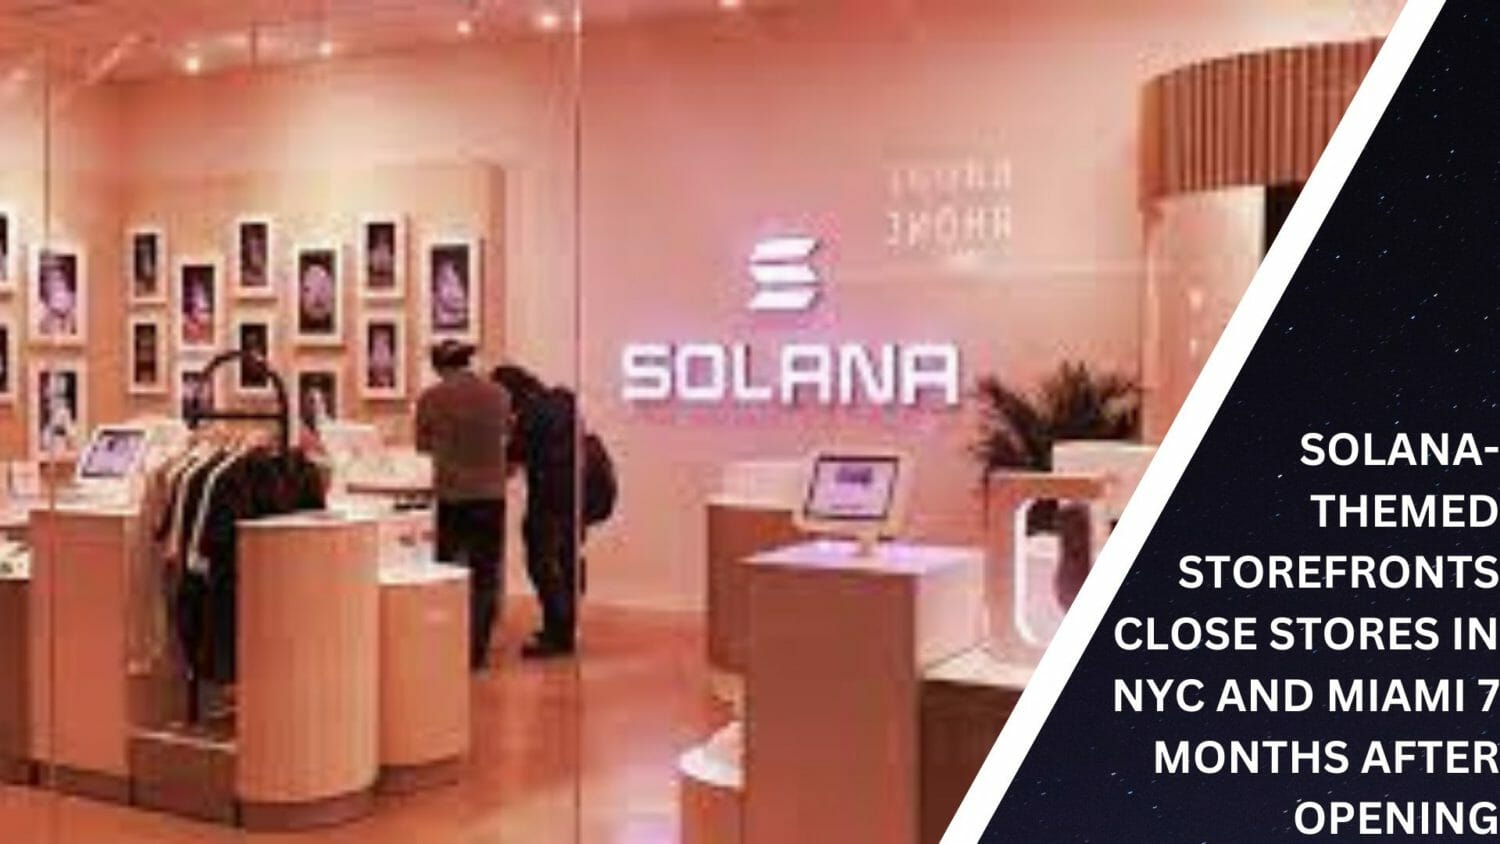 Solana-Themed Storefronts Close Stores In Nyc And Miami 7 Months After Opening